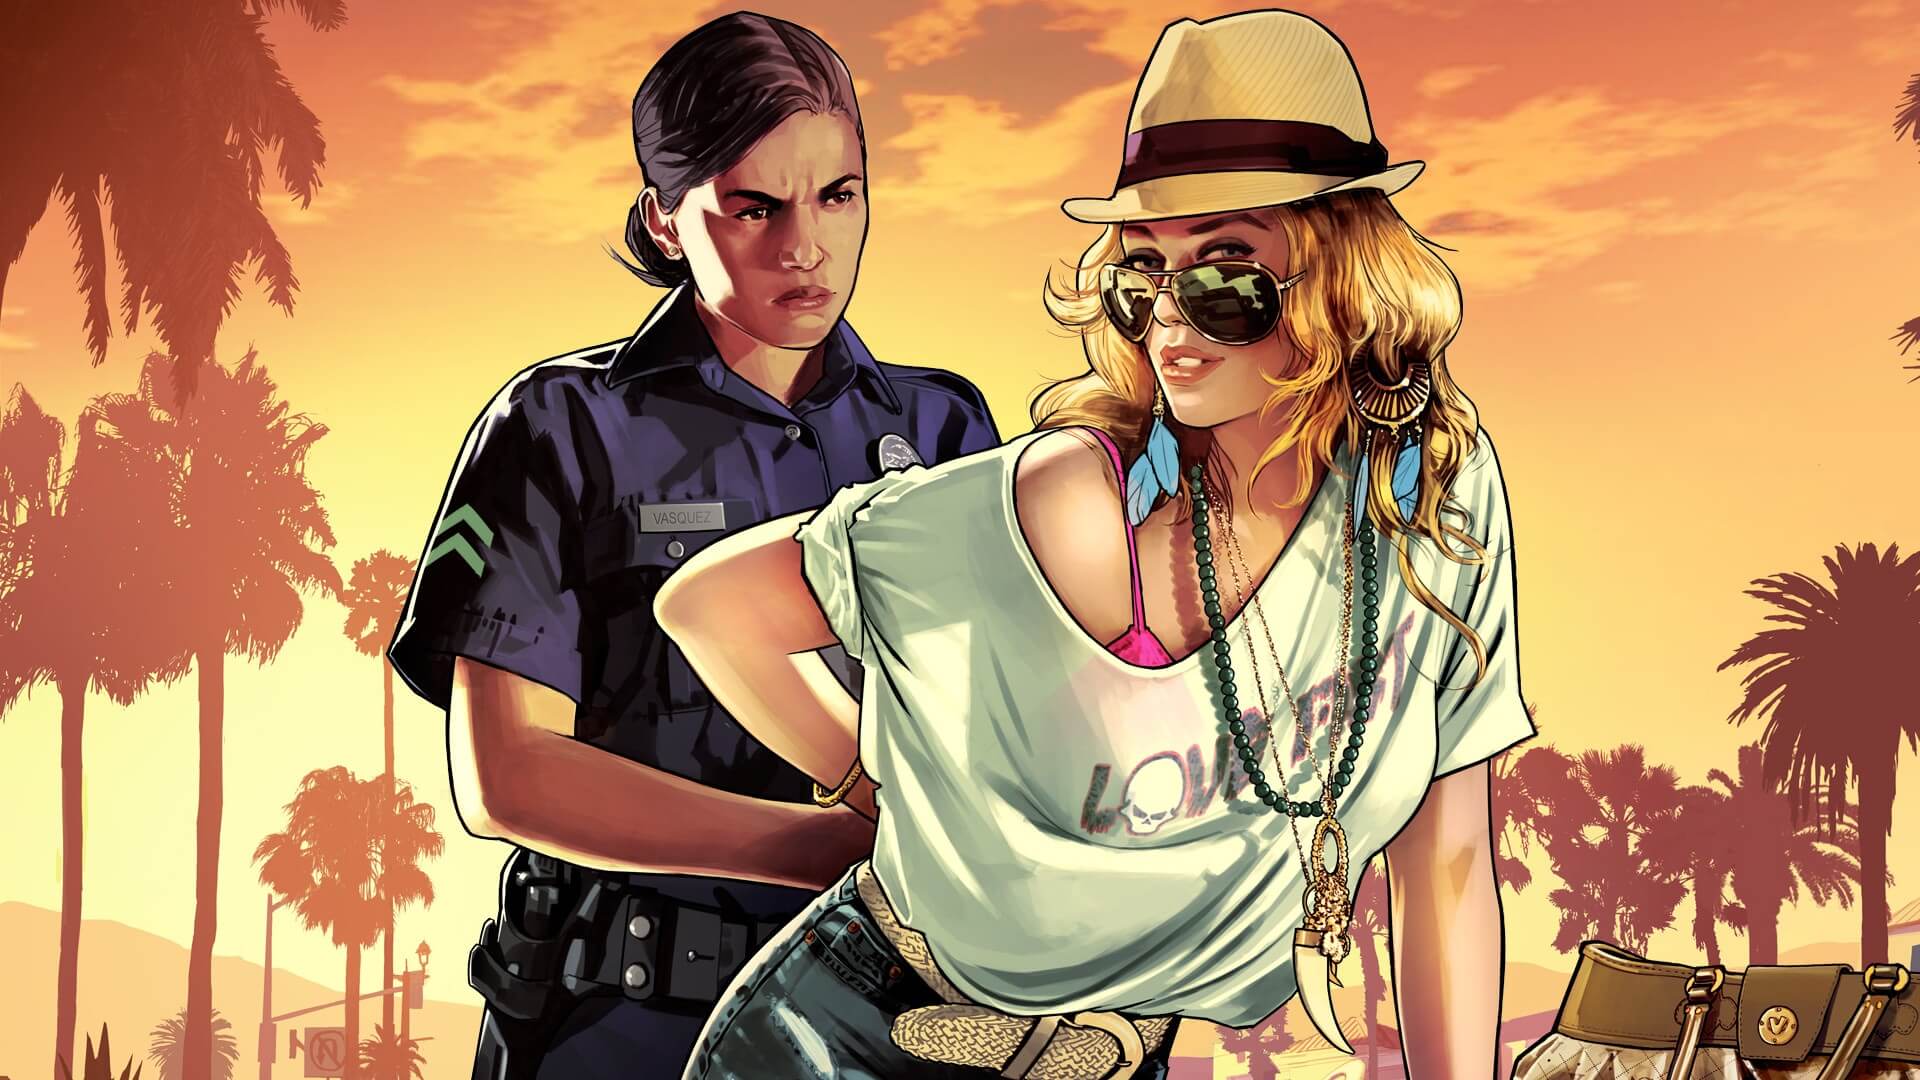 Grand Theft Auto 6 will have a female main character